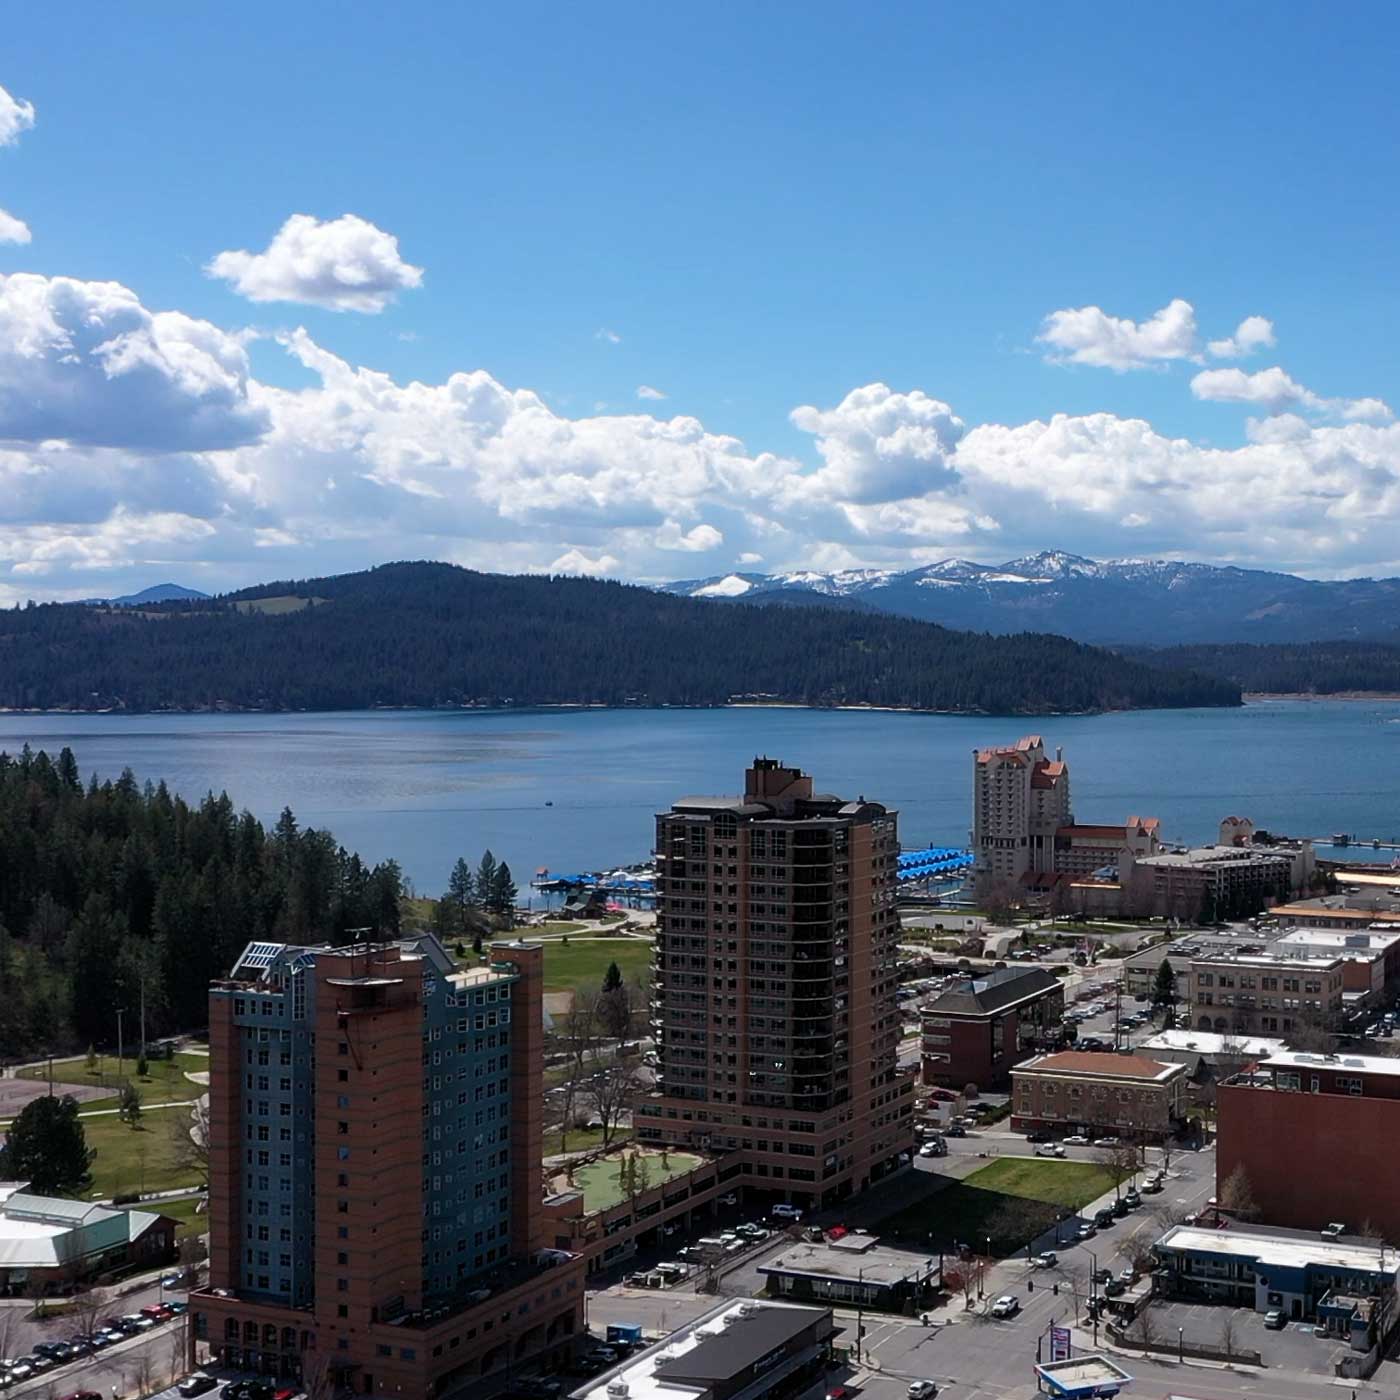 Drone photograph of downtown Coeur d'Alene with lake Coeur d'Alene in the background